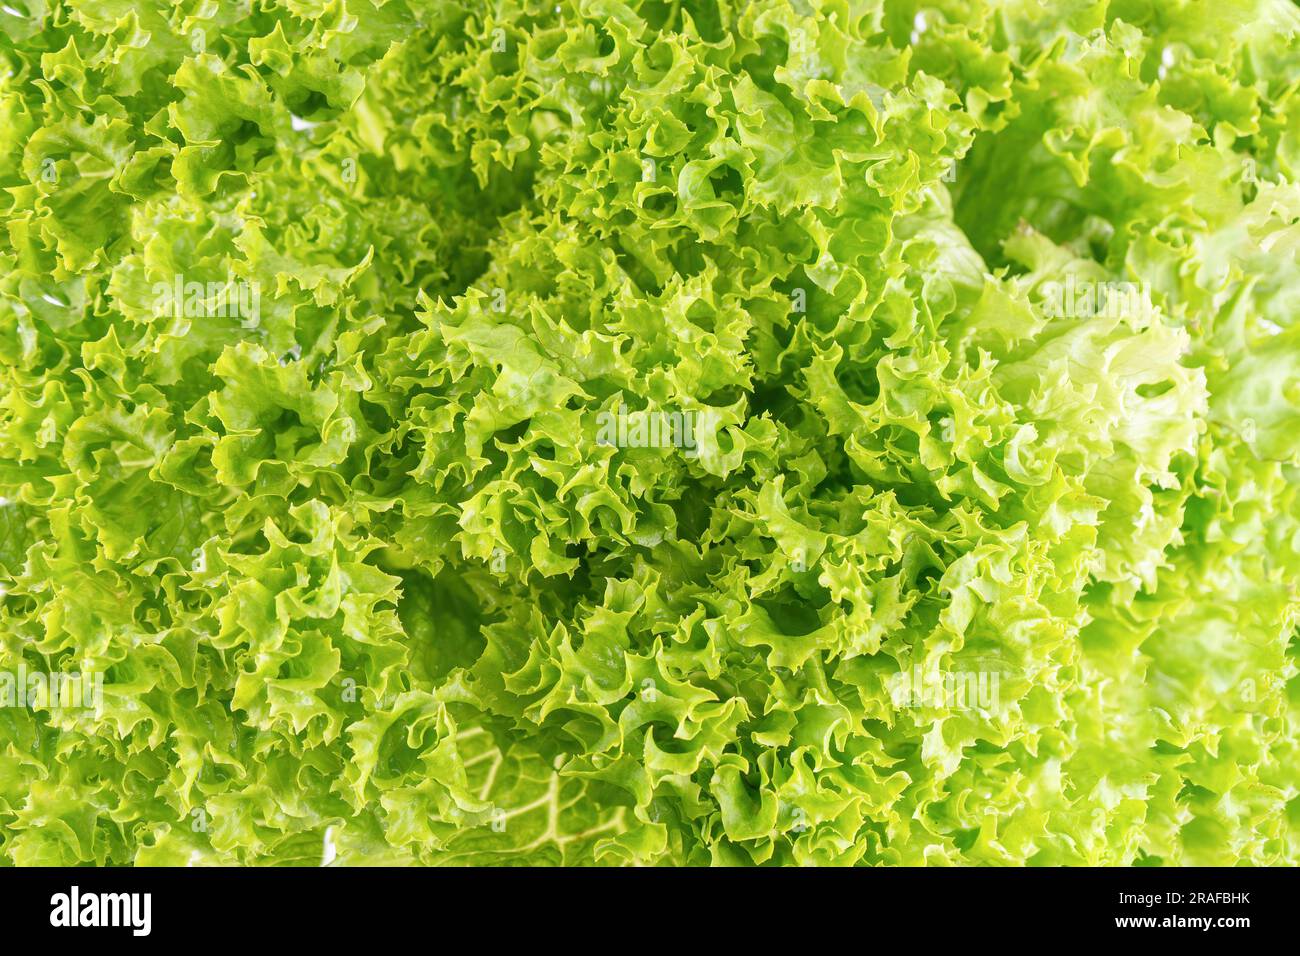 Close up lettuce organic salad, fresh green hydroponic vegetable. Salad leaves background. Vegetarian food, healthy lifestyle Stock Photo